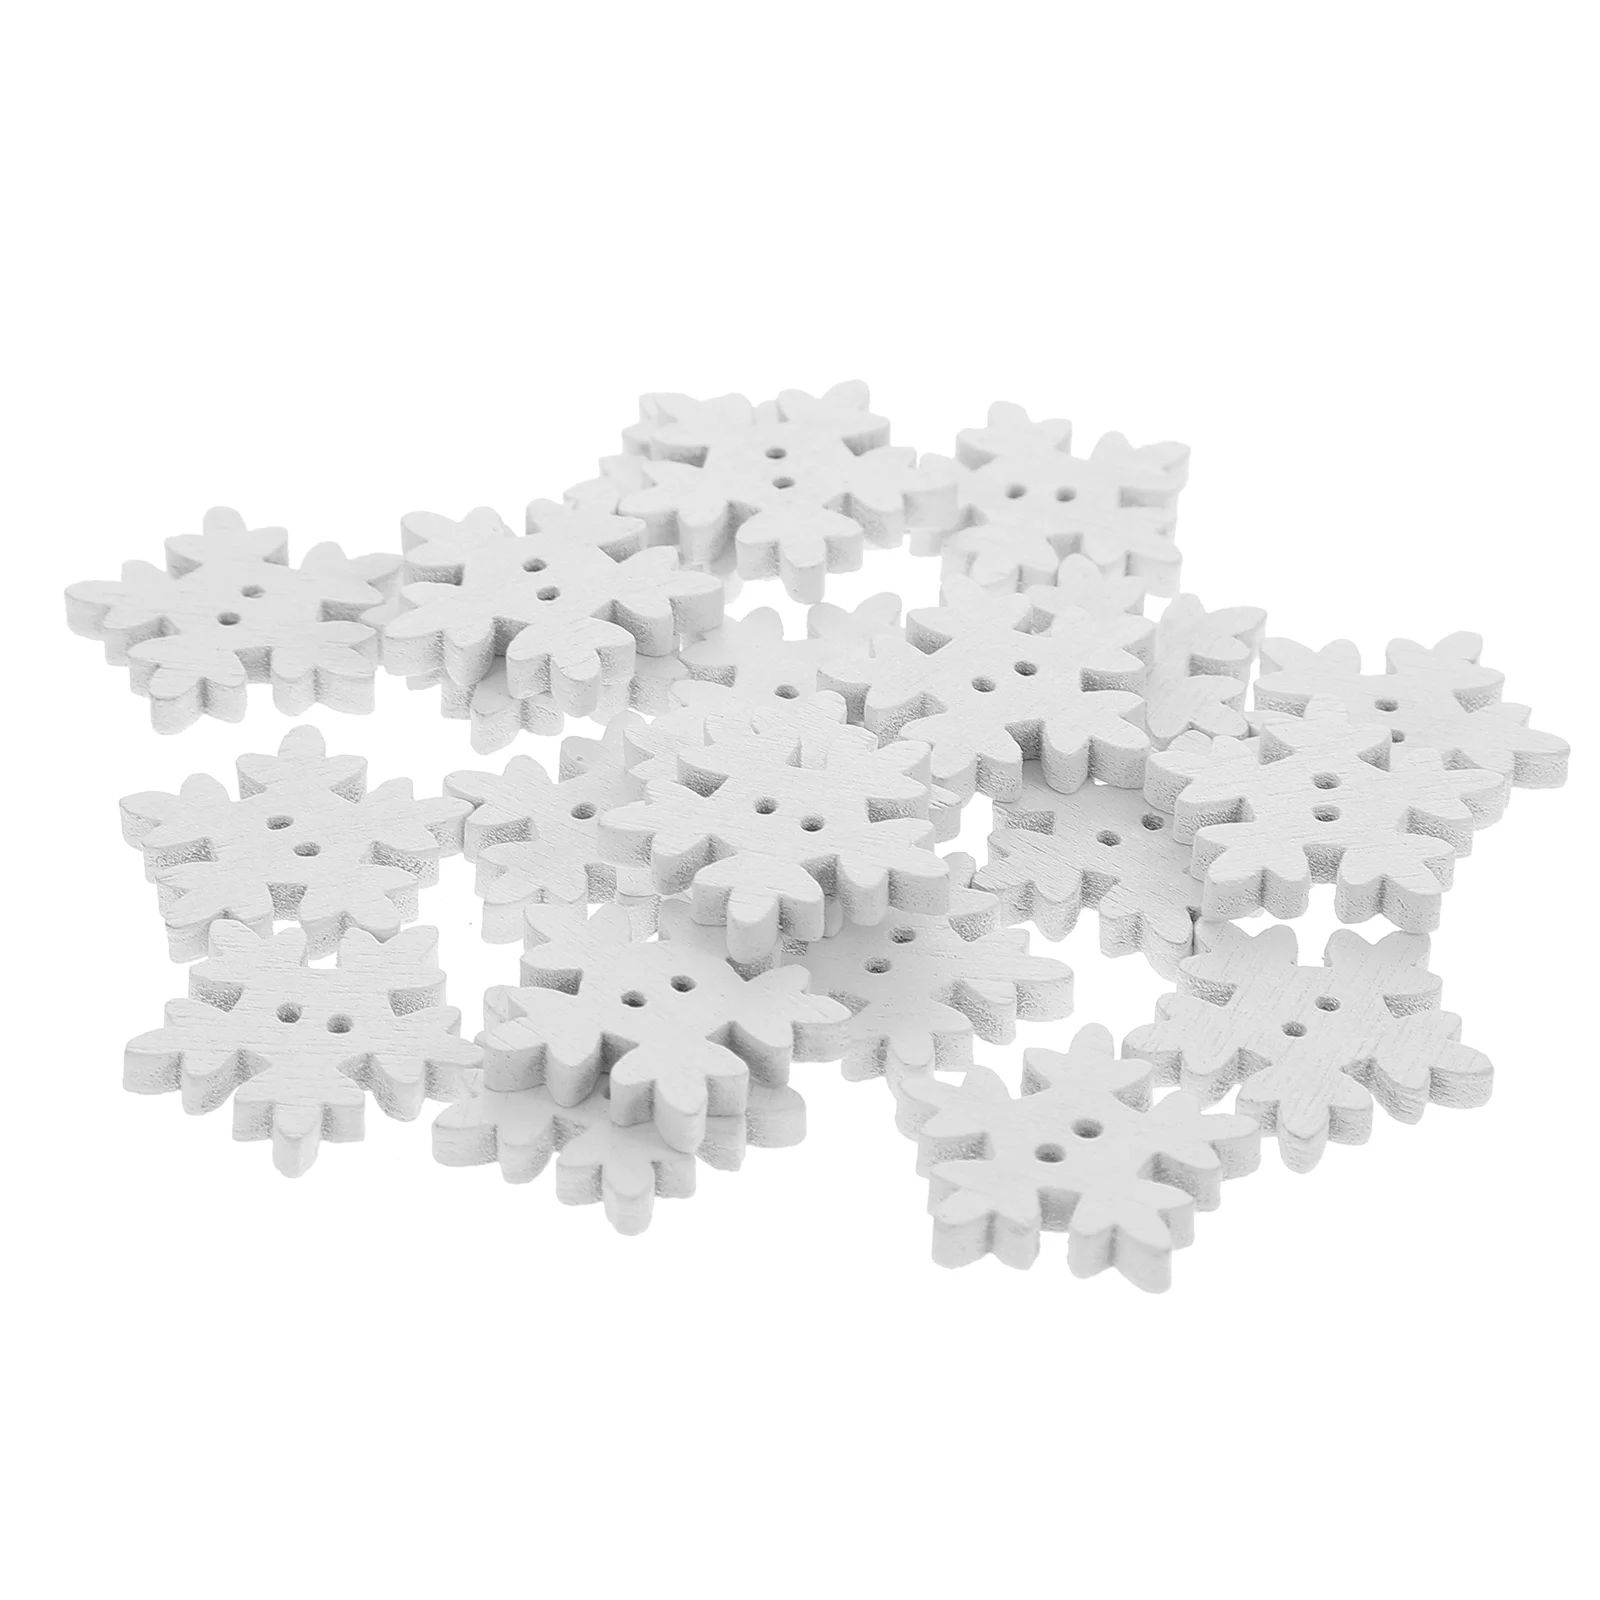 

Buttons Snowflake Button Snowflakes Wooden Christmas Sewing Embellishmentscrafts Decoration White Holes Wood Hole Embellishment